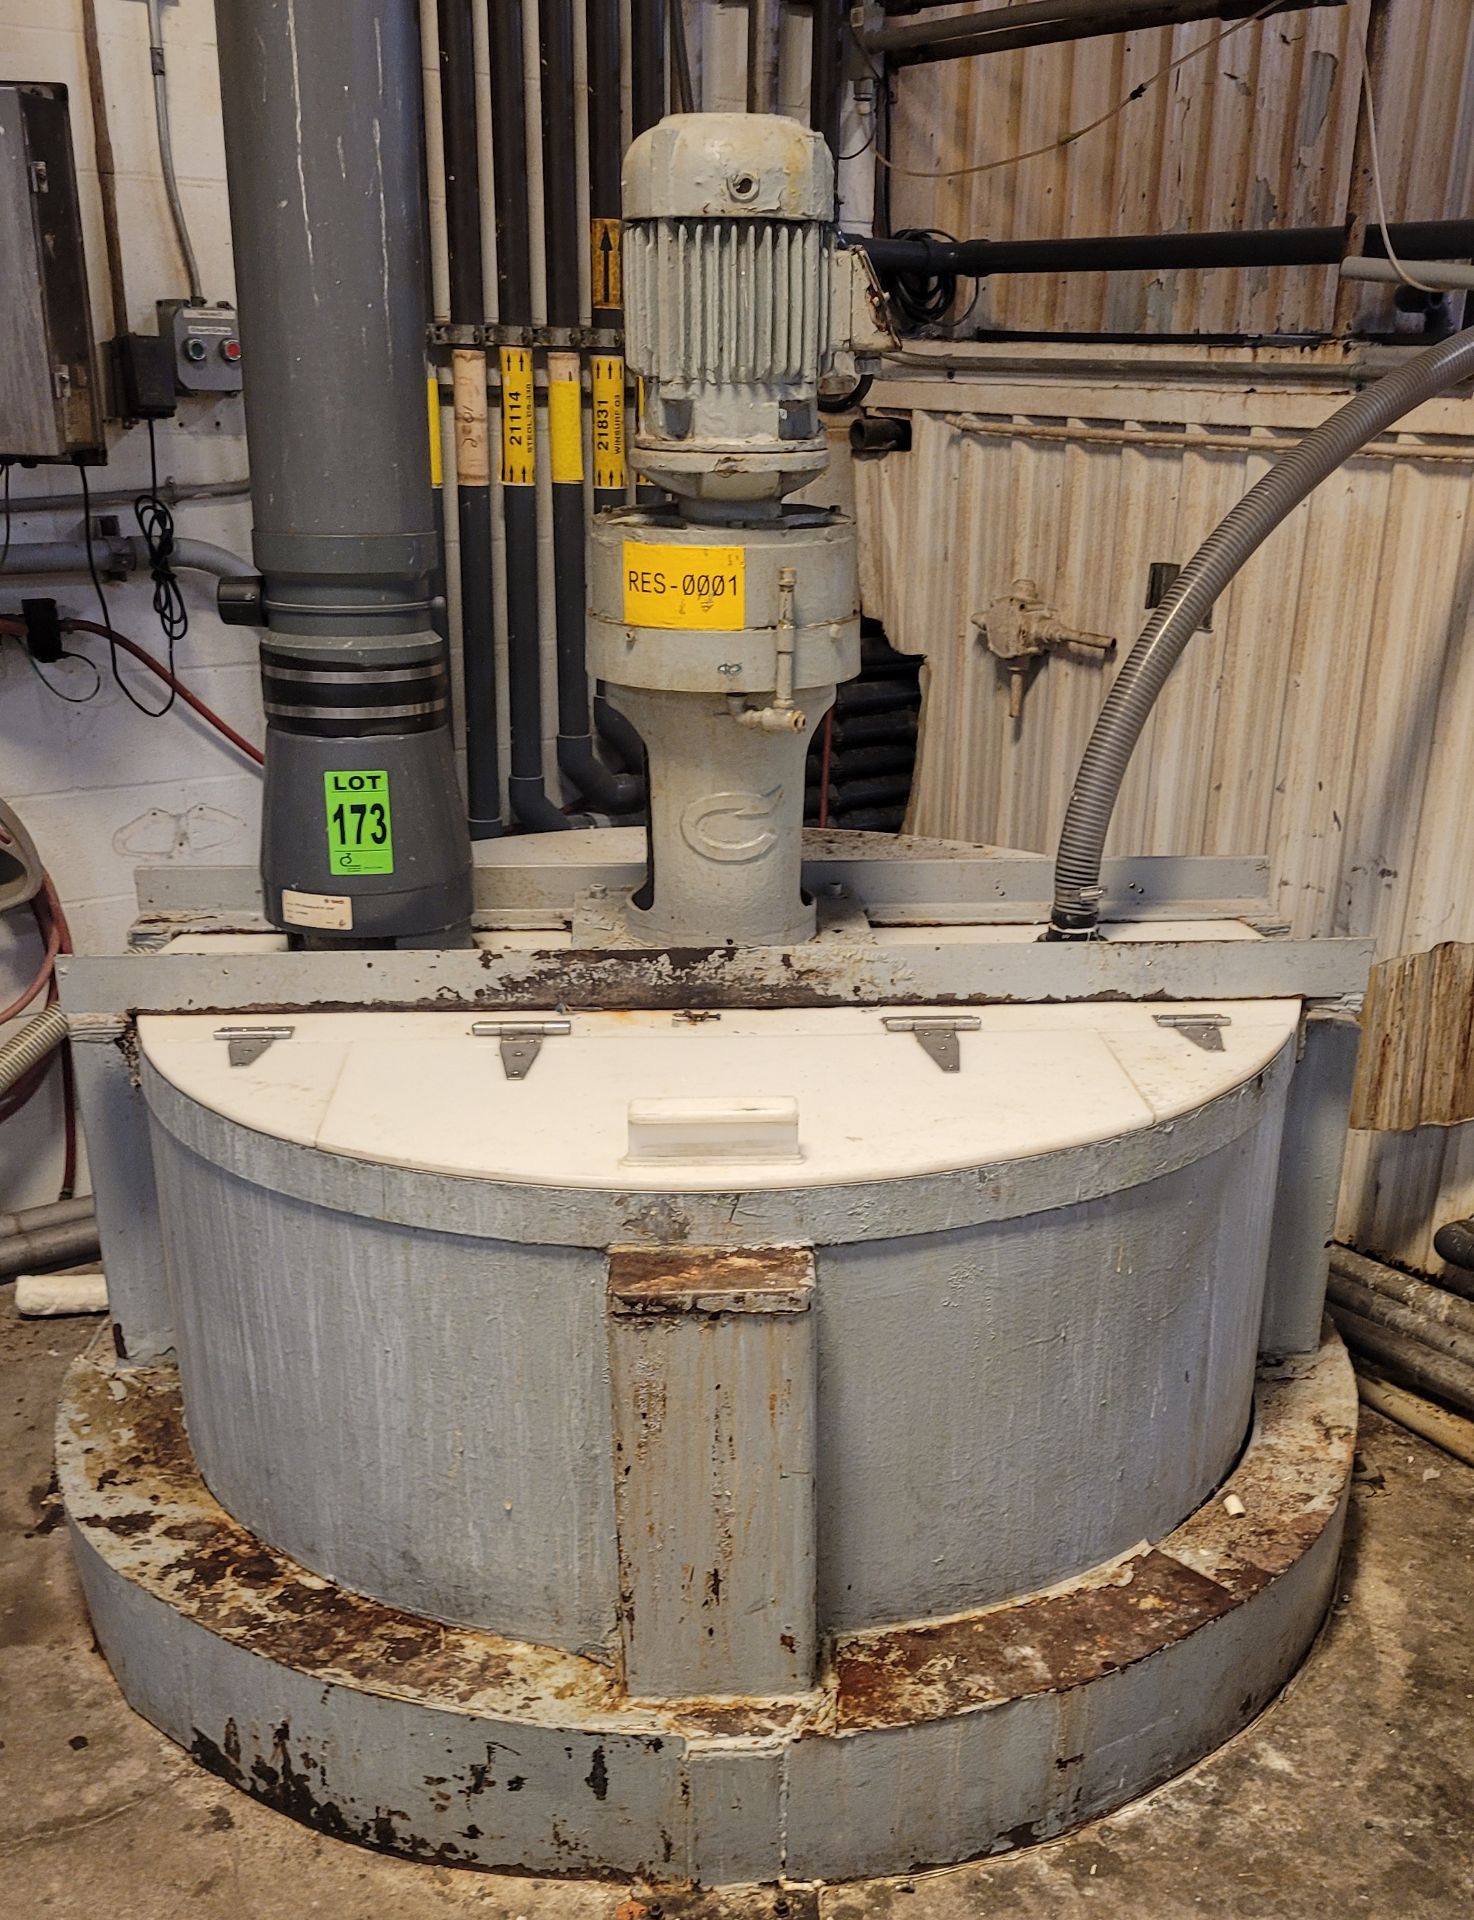 2200 L / 580 Gal Stainless Steel Tank with 1-impeller agitator/mixer and Rice Lake mod. 480+2A